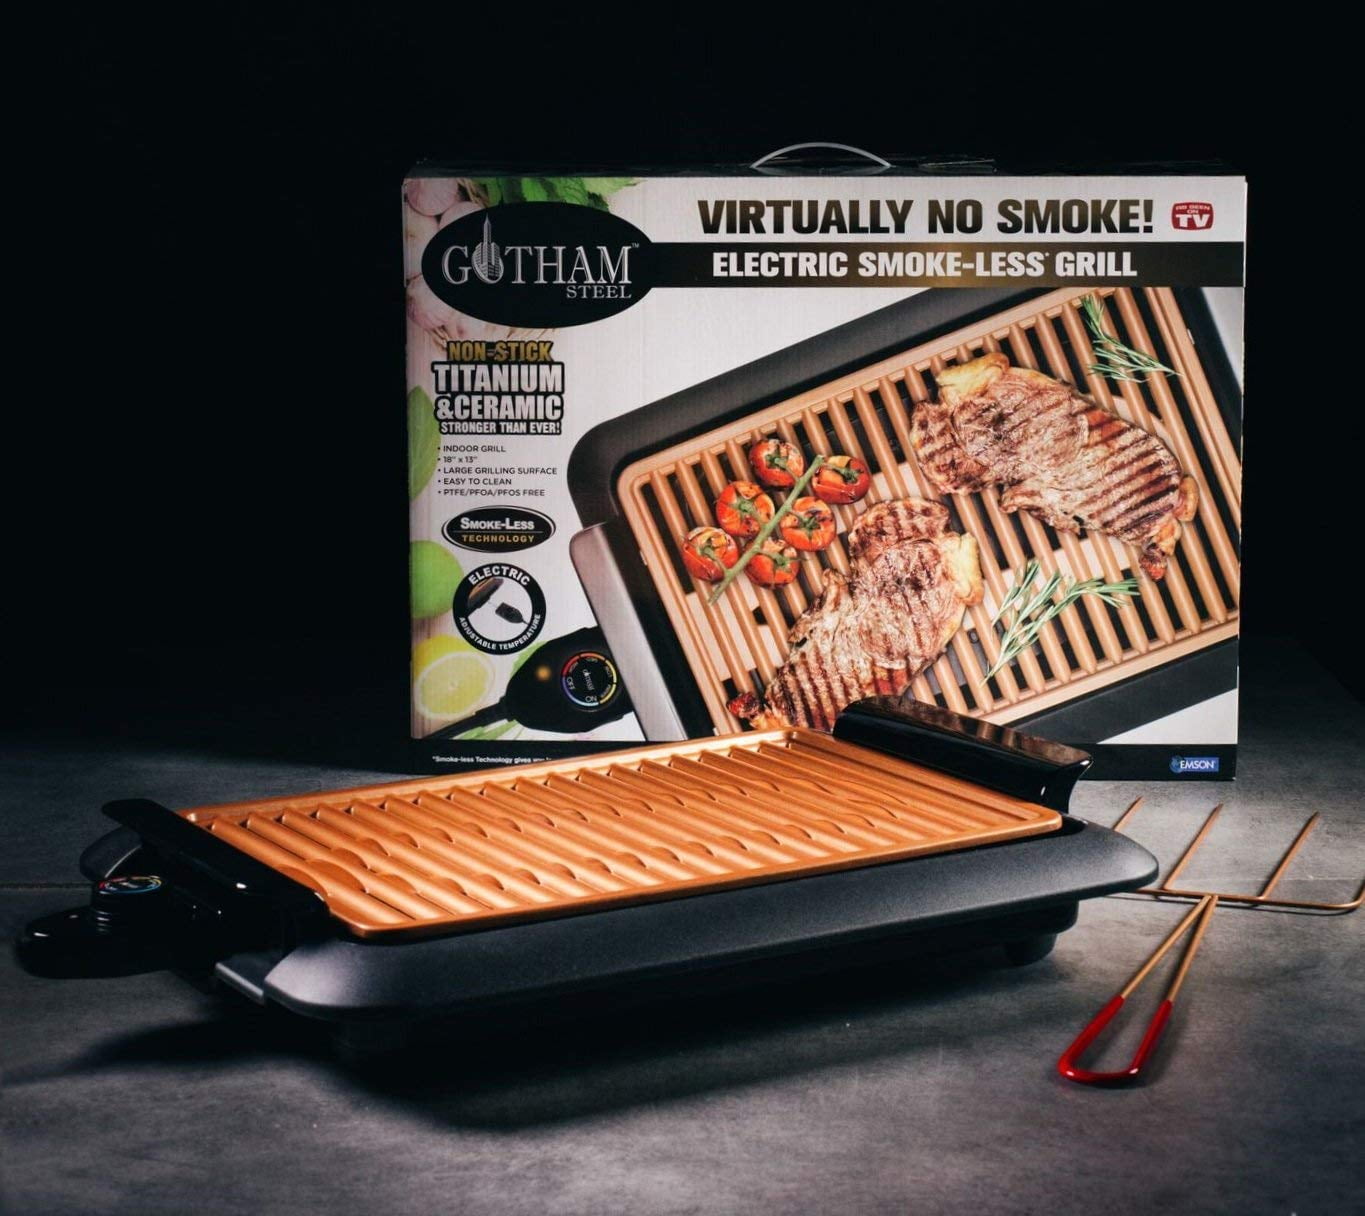 Large GOTHAM STEEL Smokeless Electric Grill Portable and Nonstick As Seen On TV 